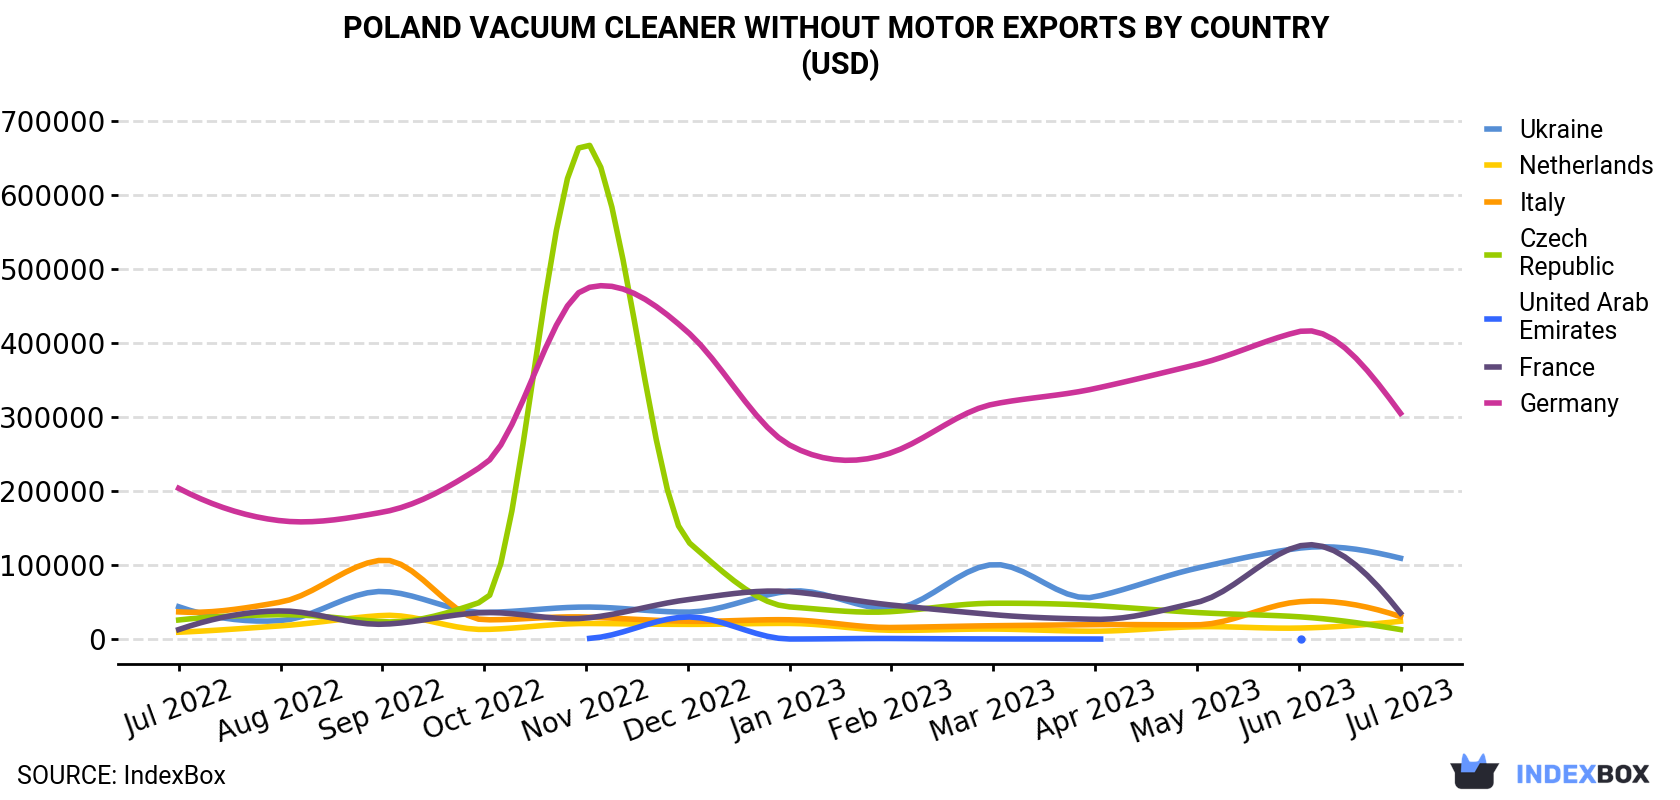 Poland Vacuum Cleaner Without Motor Exports By Country (USD)